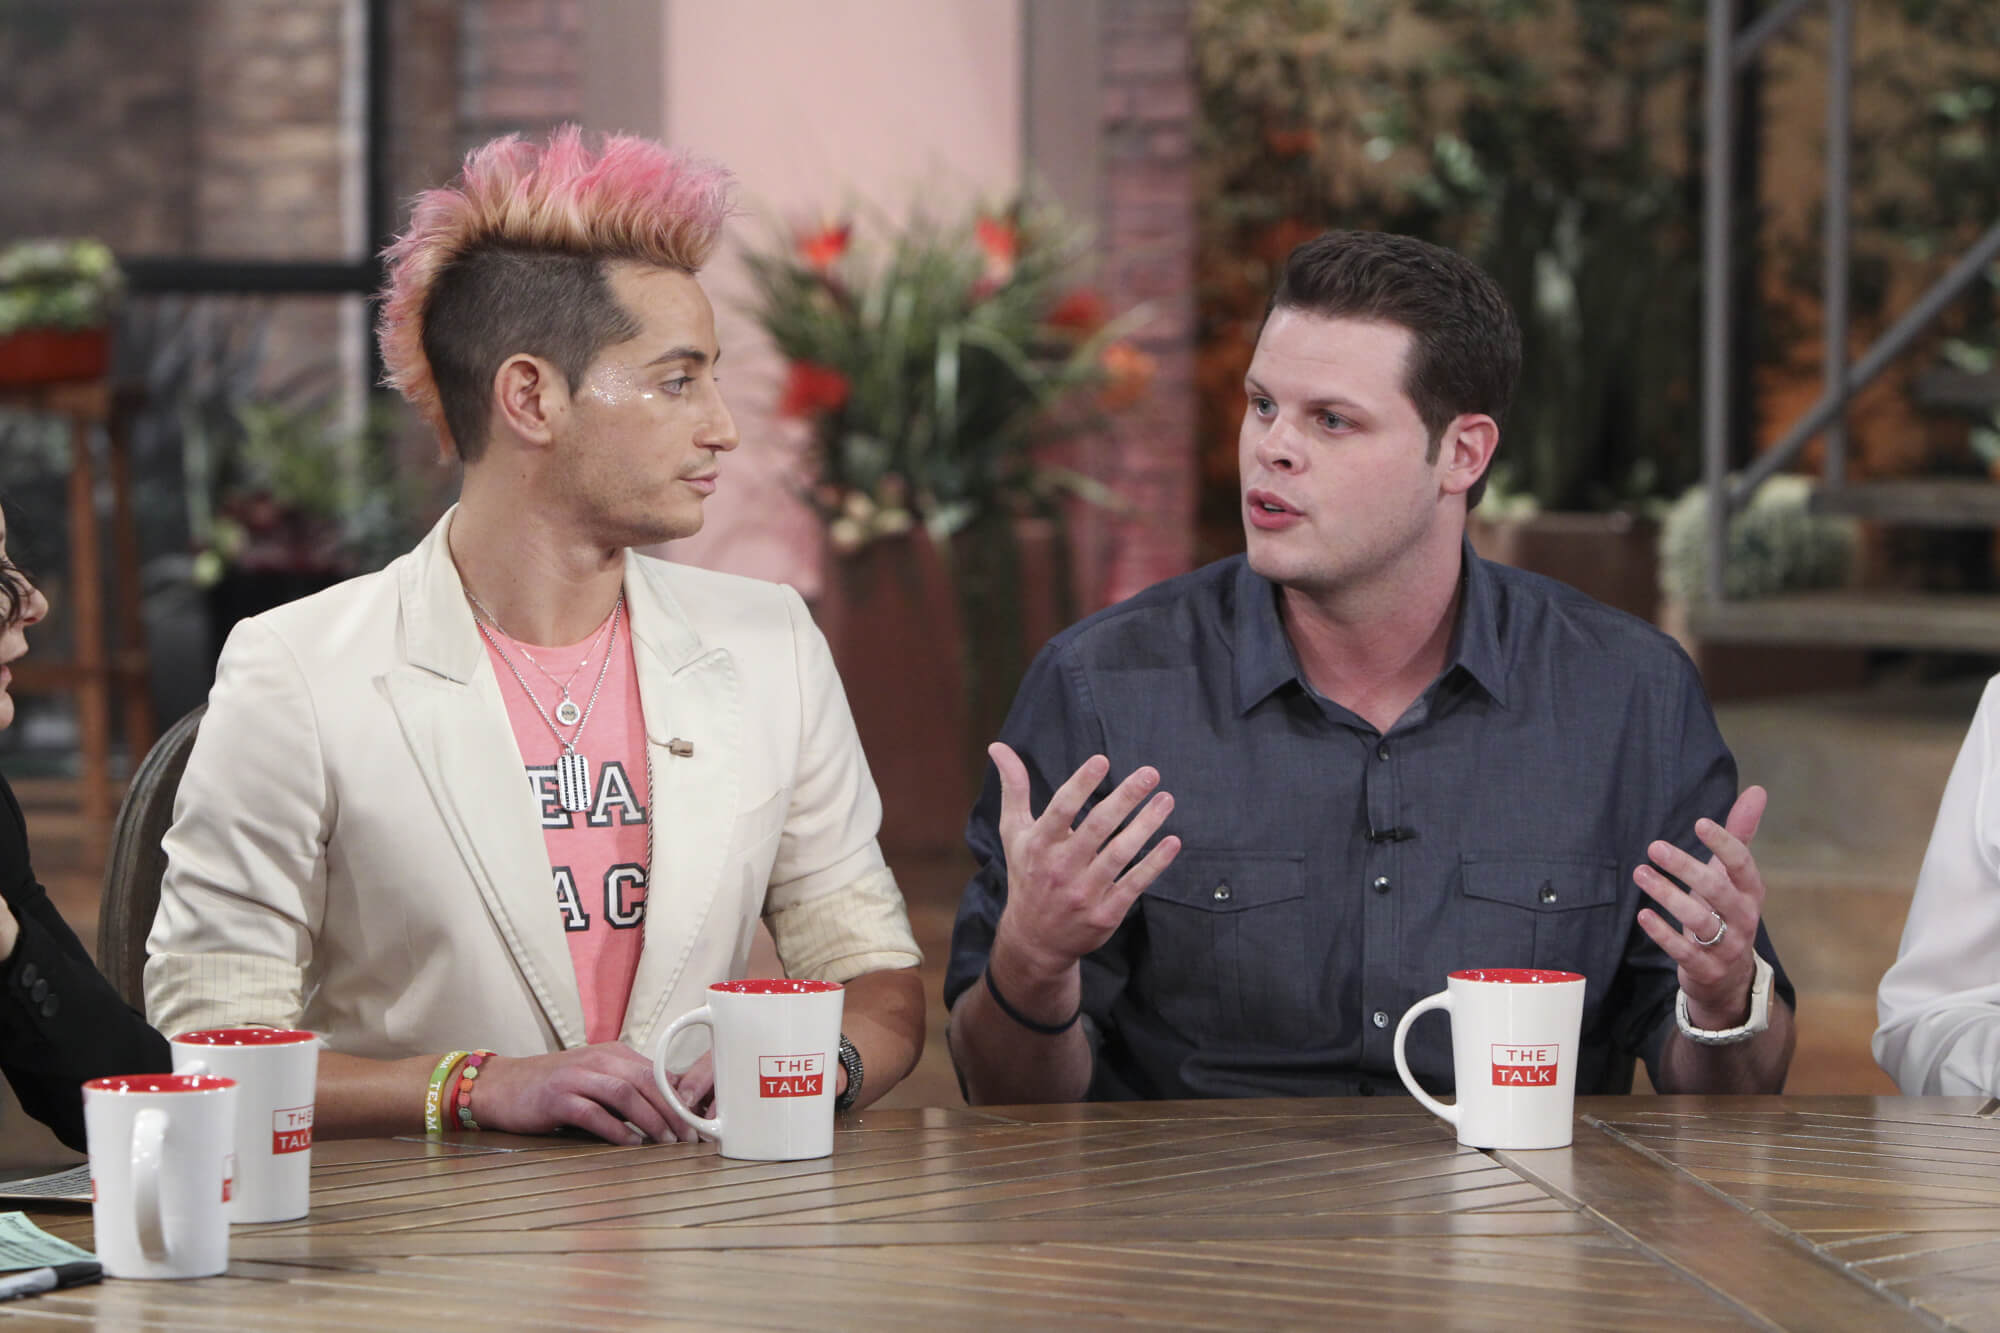 'Big Brother 16' houseguests Frankie Grande, who said he wanted to play again in 2023, and Derrick Levasseur visit 'The Talk.' Frankie wears a white suit over a pink shirt. Derrick wears a dark gray button-up shirt.